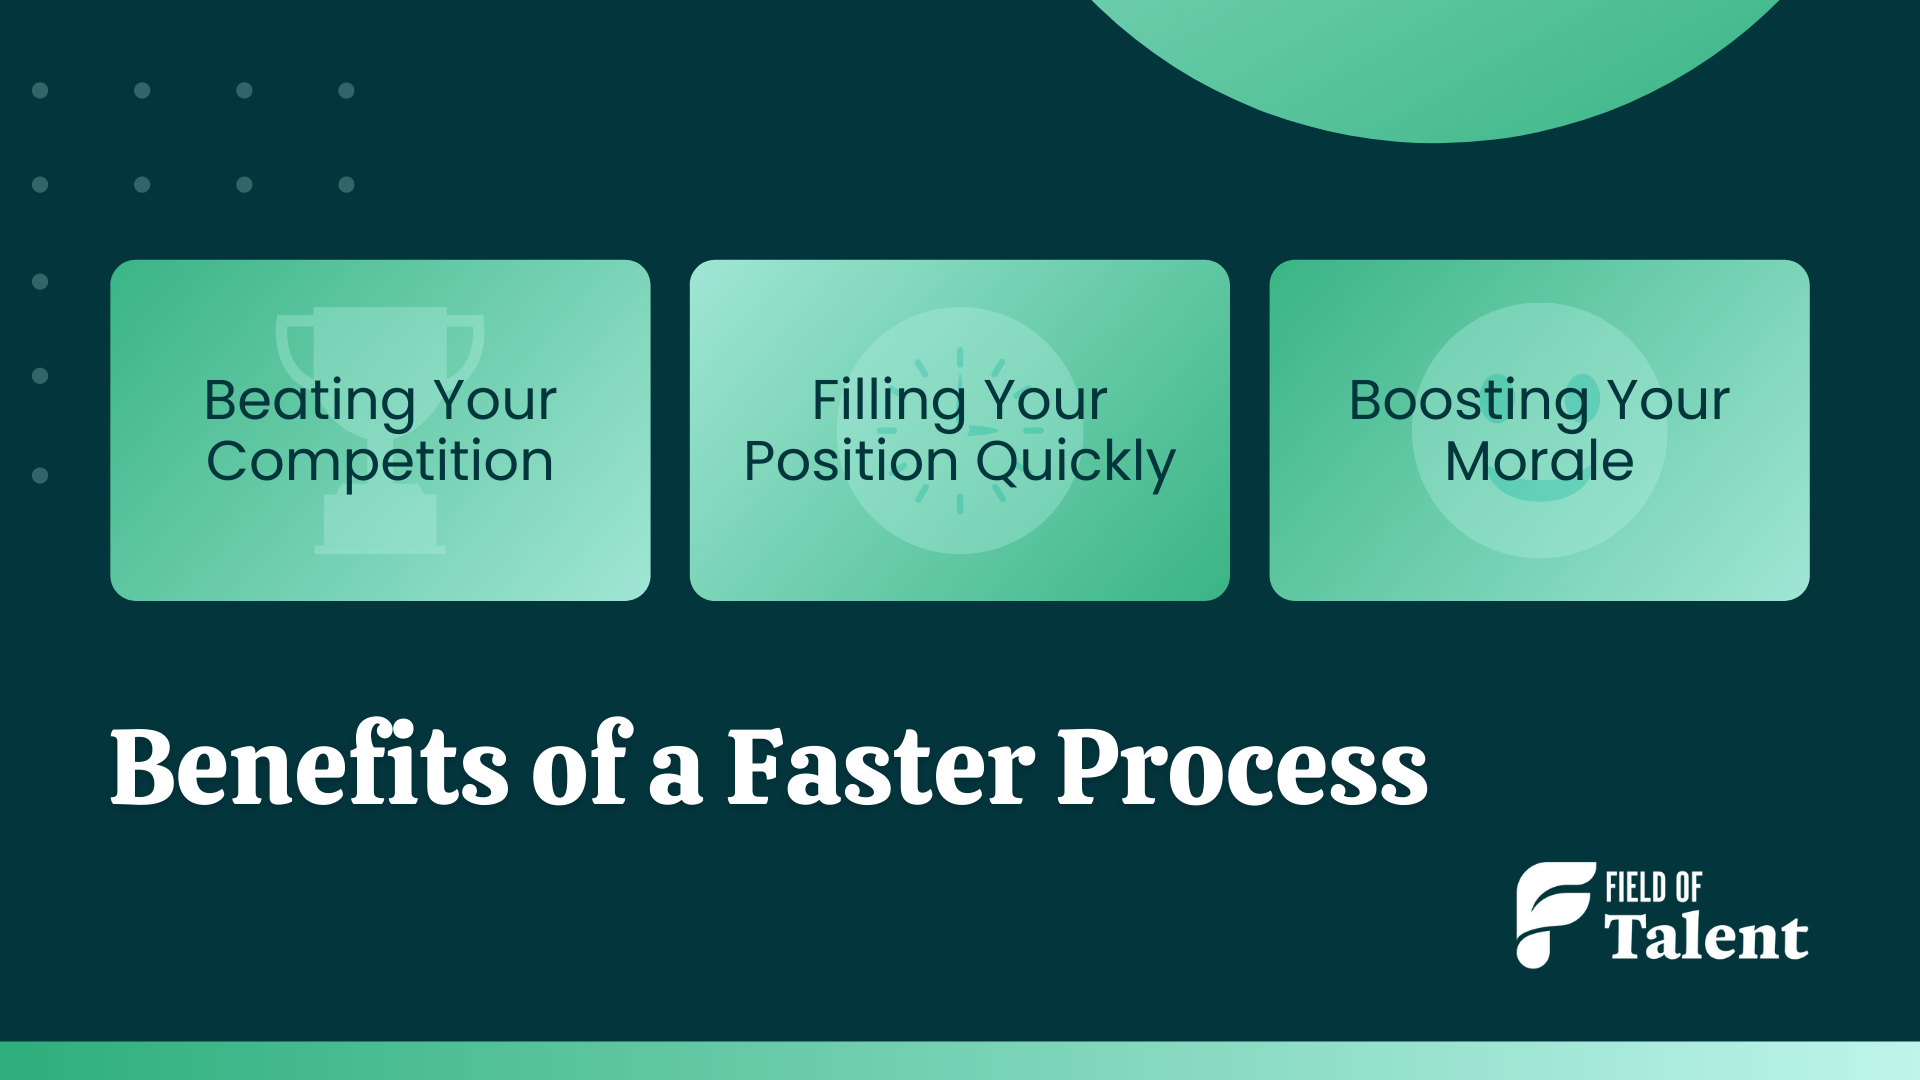 Benefits of a Faster Process